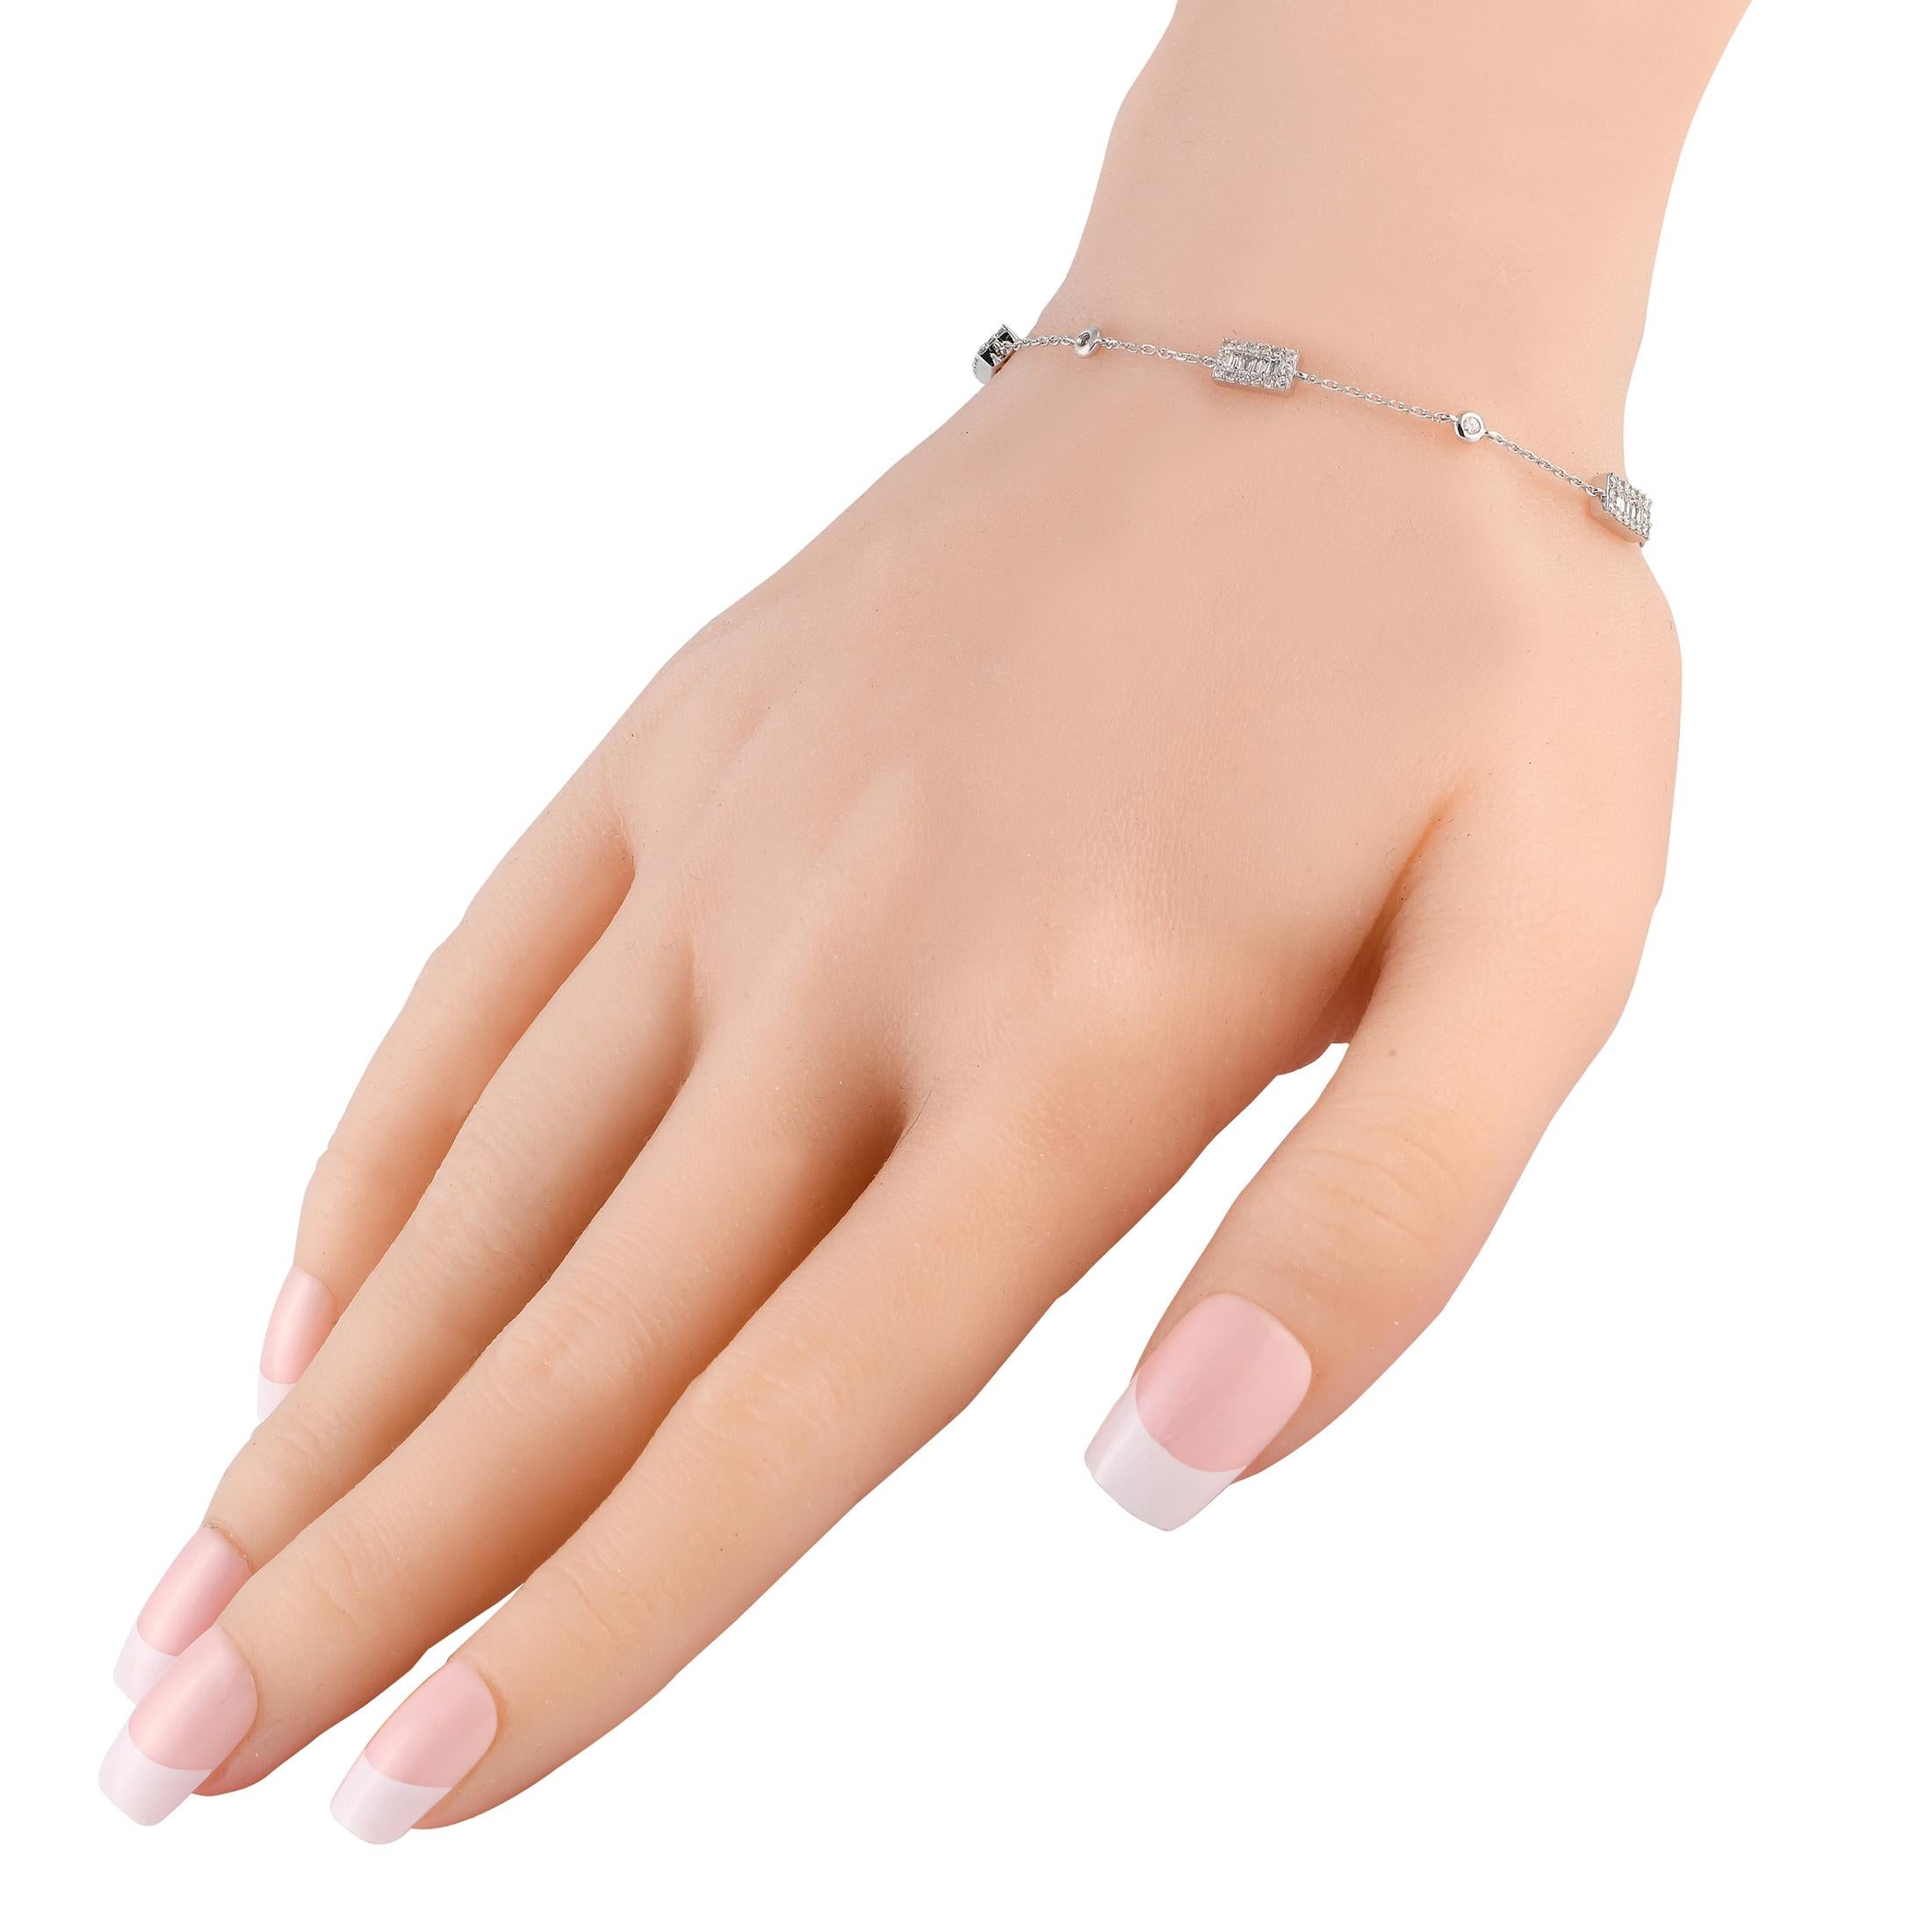 This bracelet is a simple stunner that looks good on its own or layered with other bracelets. It is crafted in 14K white gold and designed with an alternating pattern of bezel-set round diamonds and diamond clusters in a rectangular setting.This